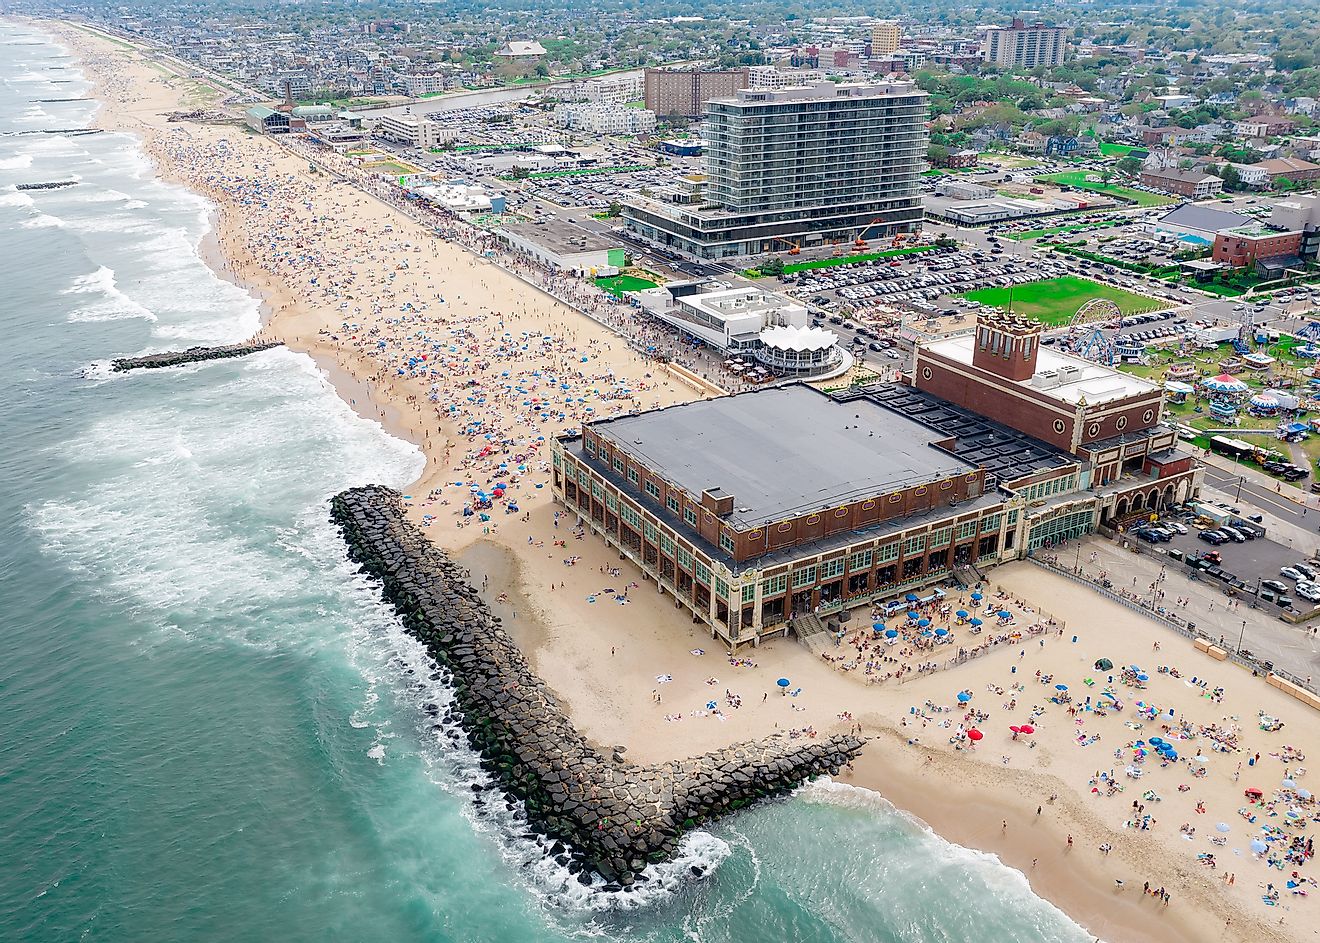 Aerial view of beach goers in Asbury Park, New Jersey.